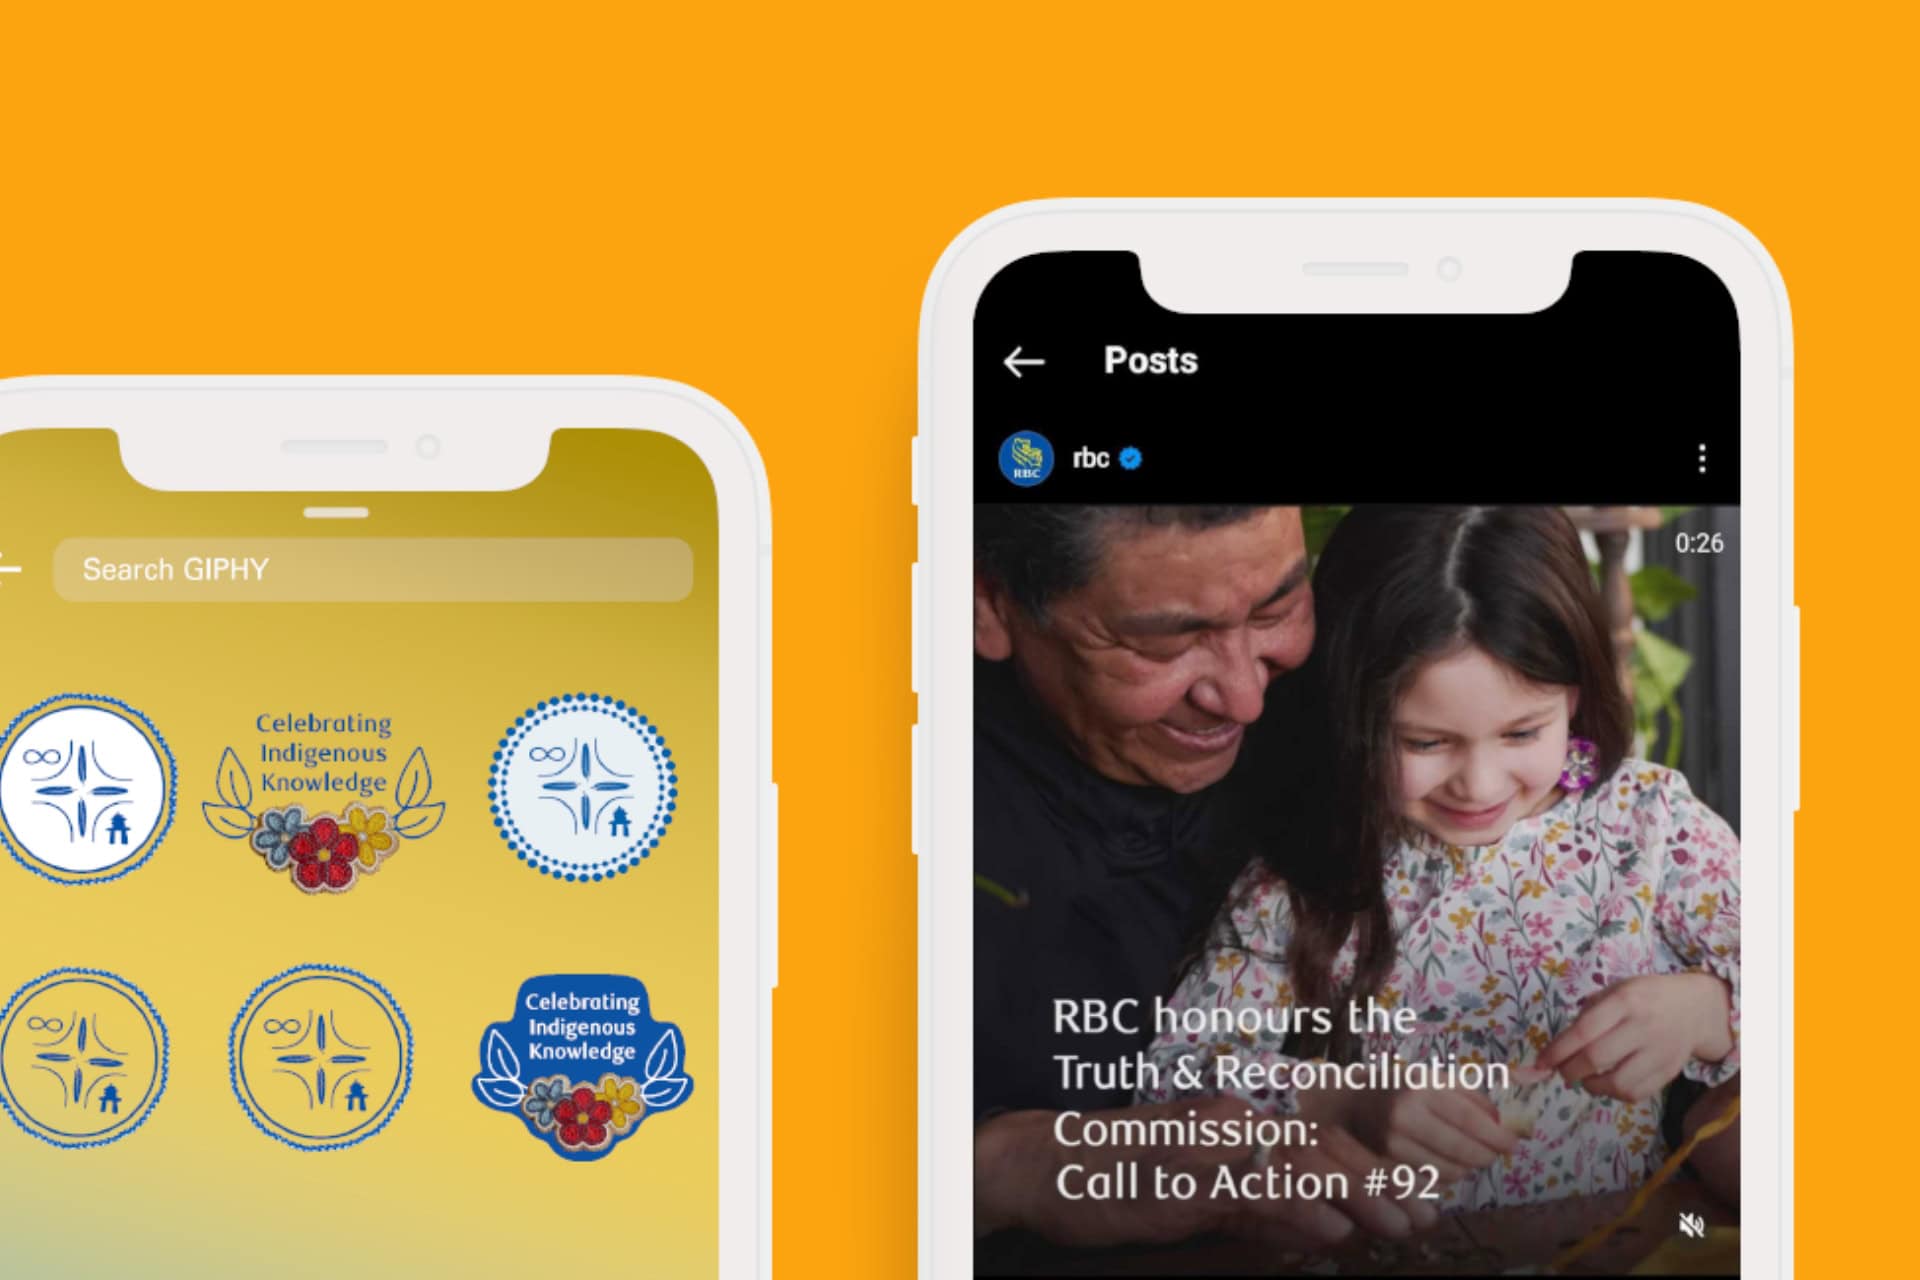 iPhone mockups of A Chosen Journey icons and branding are shown. One of the two iPhones shown has a photograph of an Indigenous man and his daughter looking at something together, overlaid with the text 'RBC honours the Truth & Reconciliation Commission: Call to Action #2'.